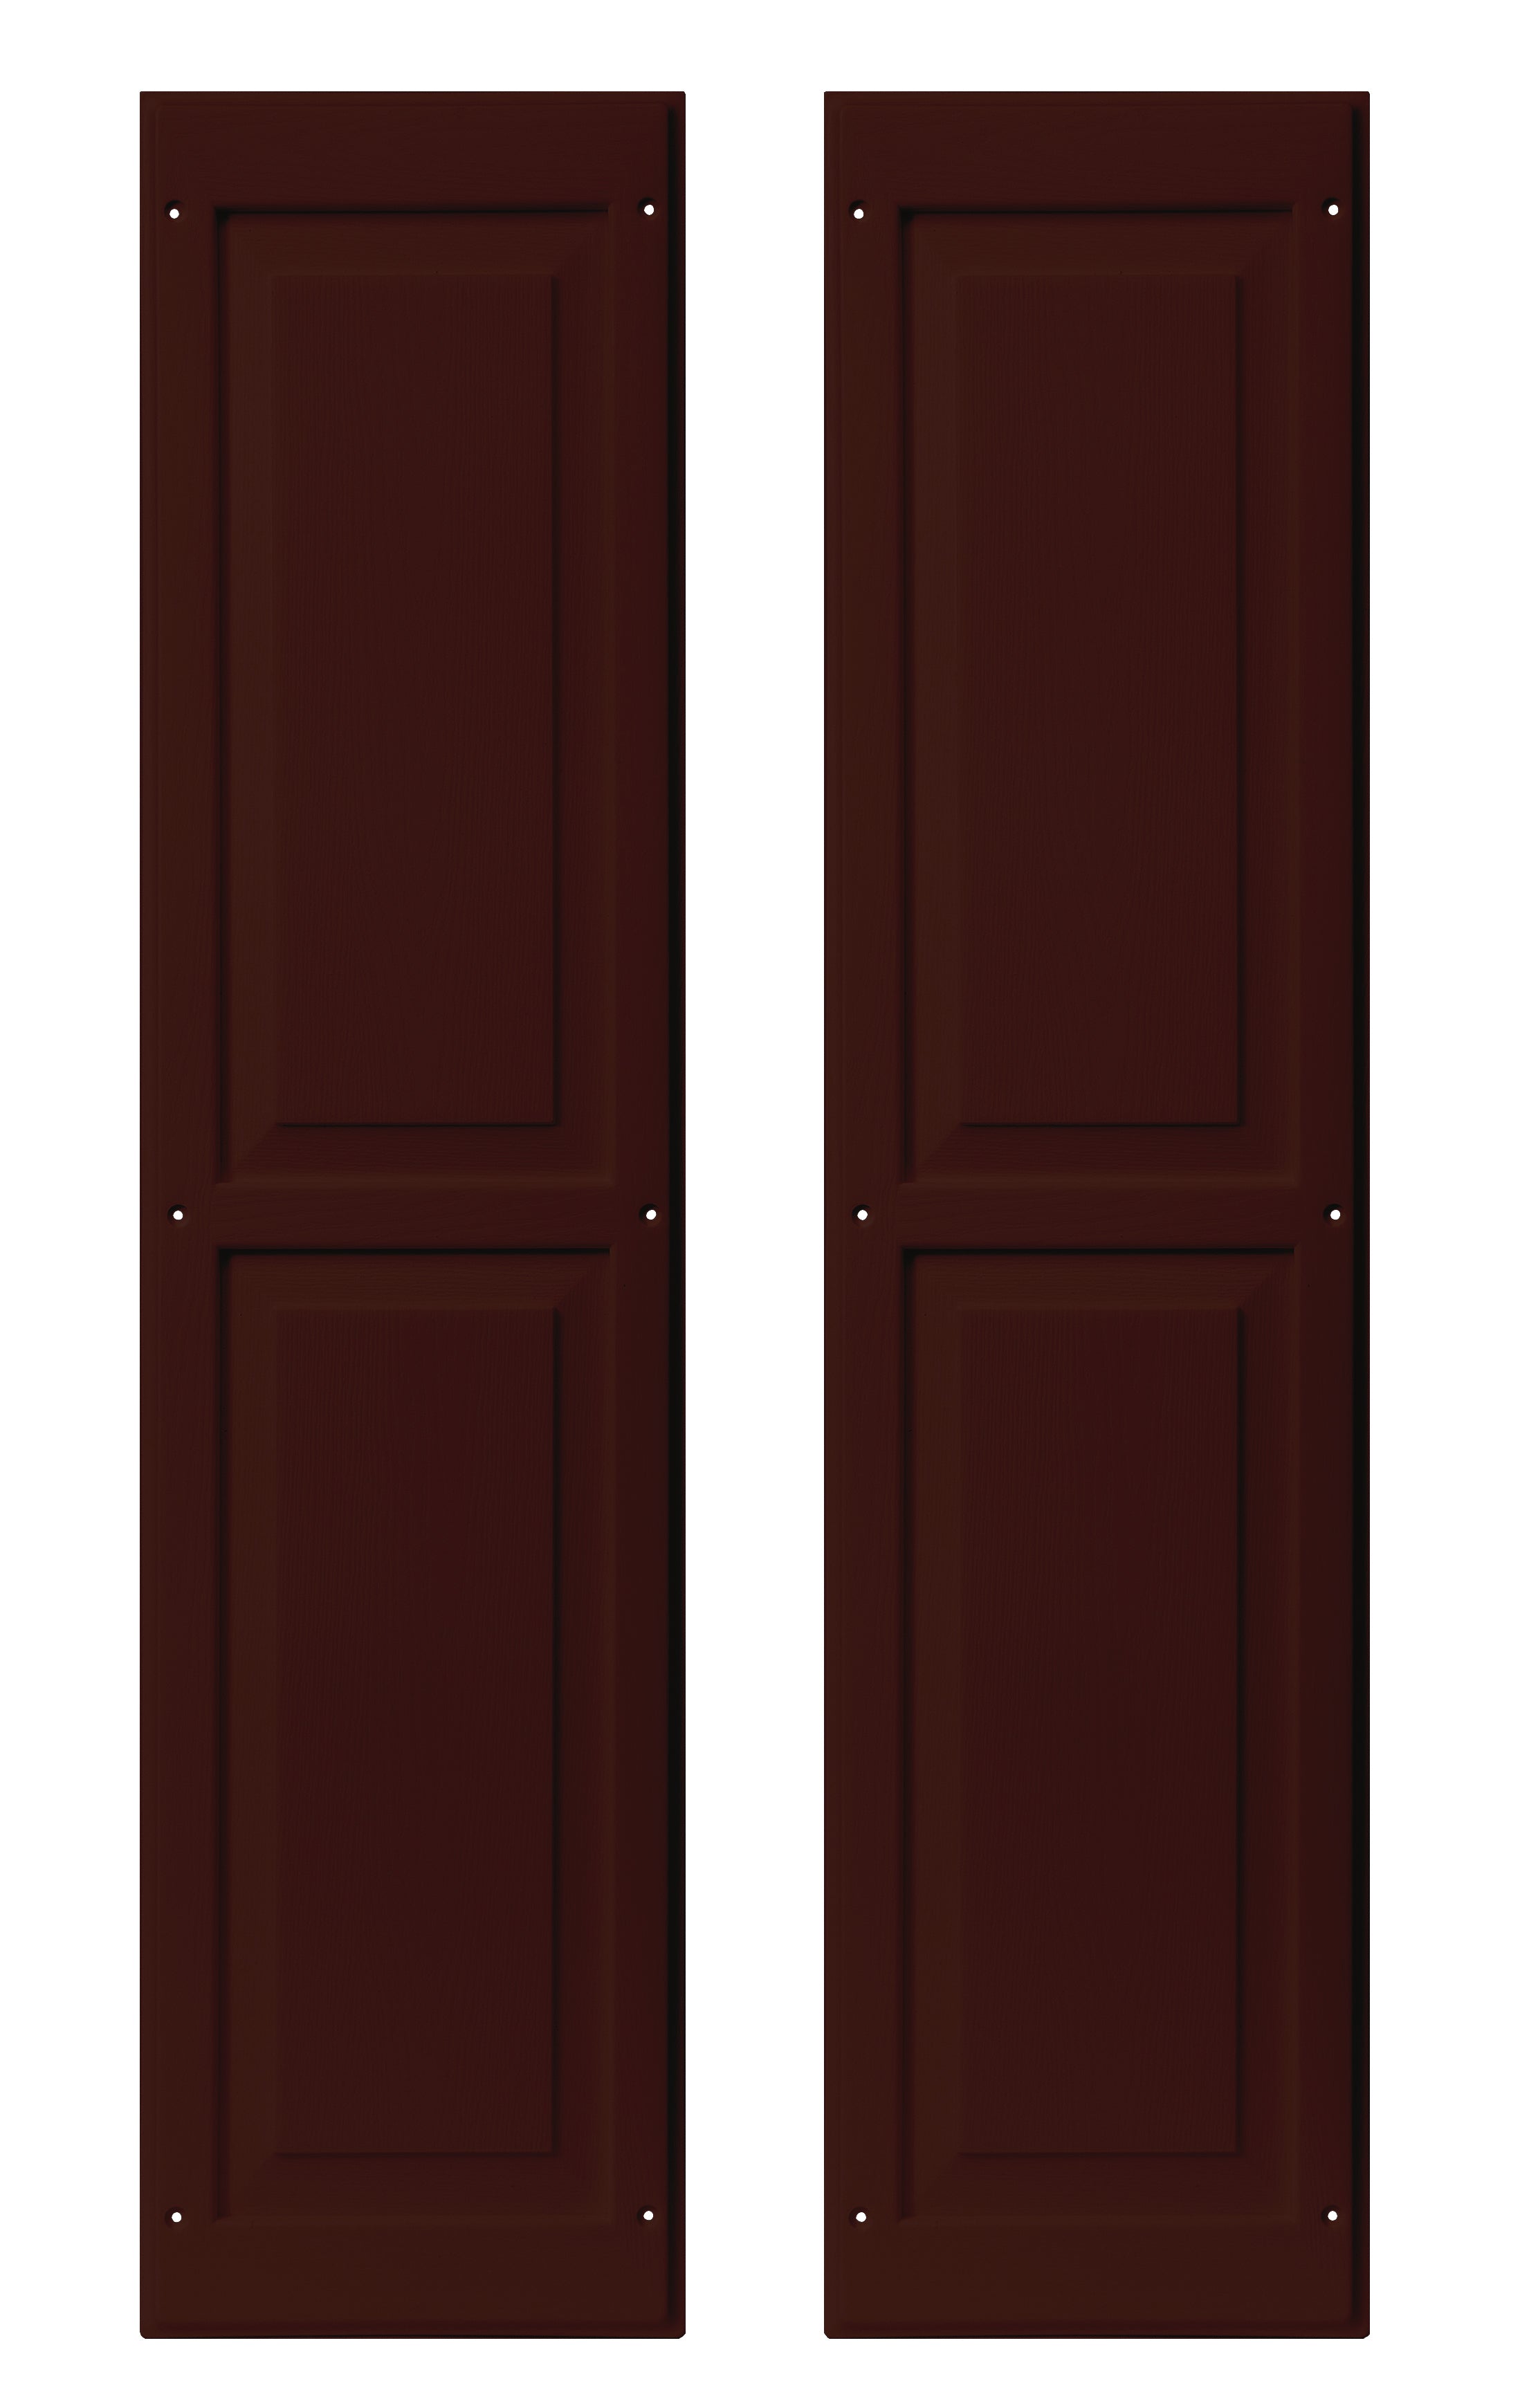 Pair of 9" W x 36" H Raised Panel Brown Shutters for Sheds, Playhouses, and MORE